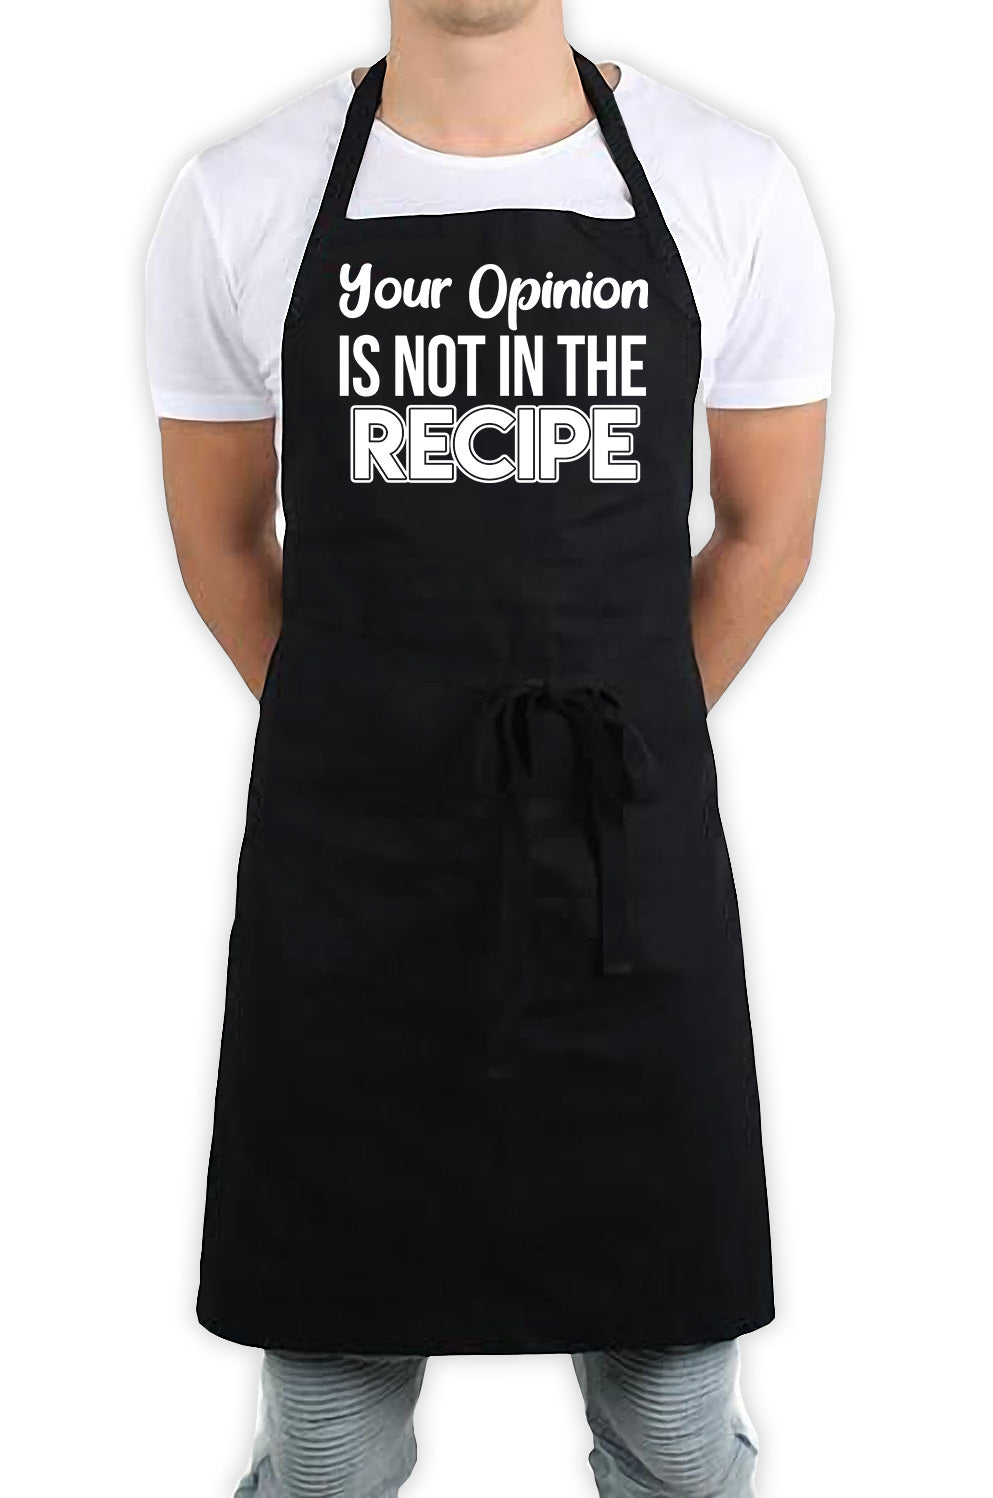 Your Opinion Is Not In The Recipe Funny Kitchen BBQ Apron Black